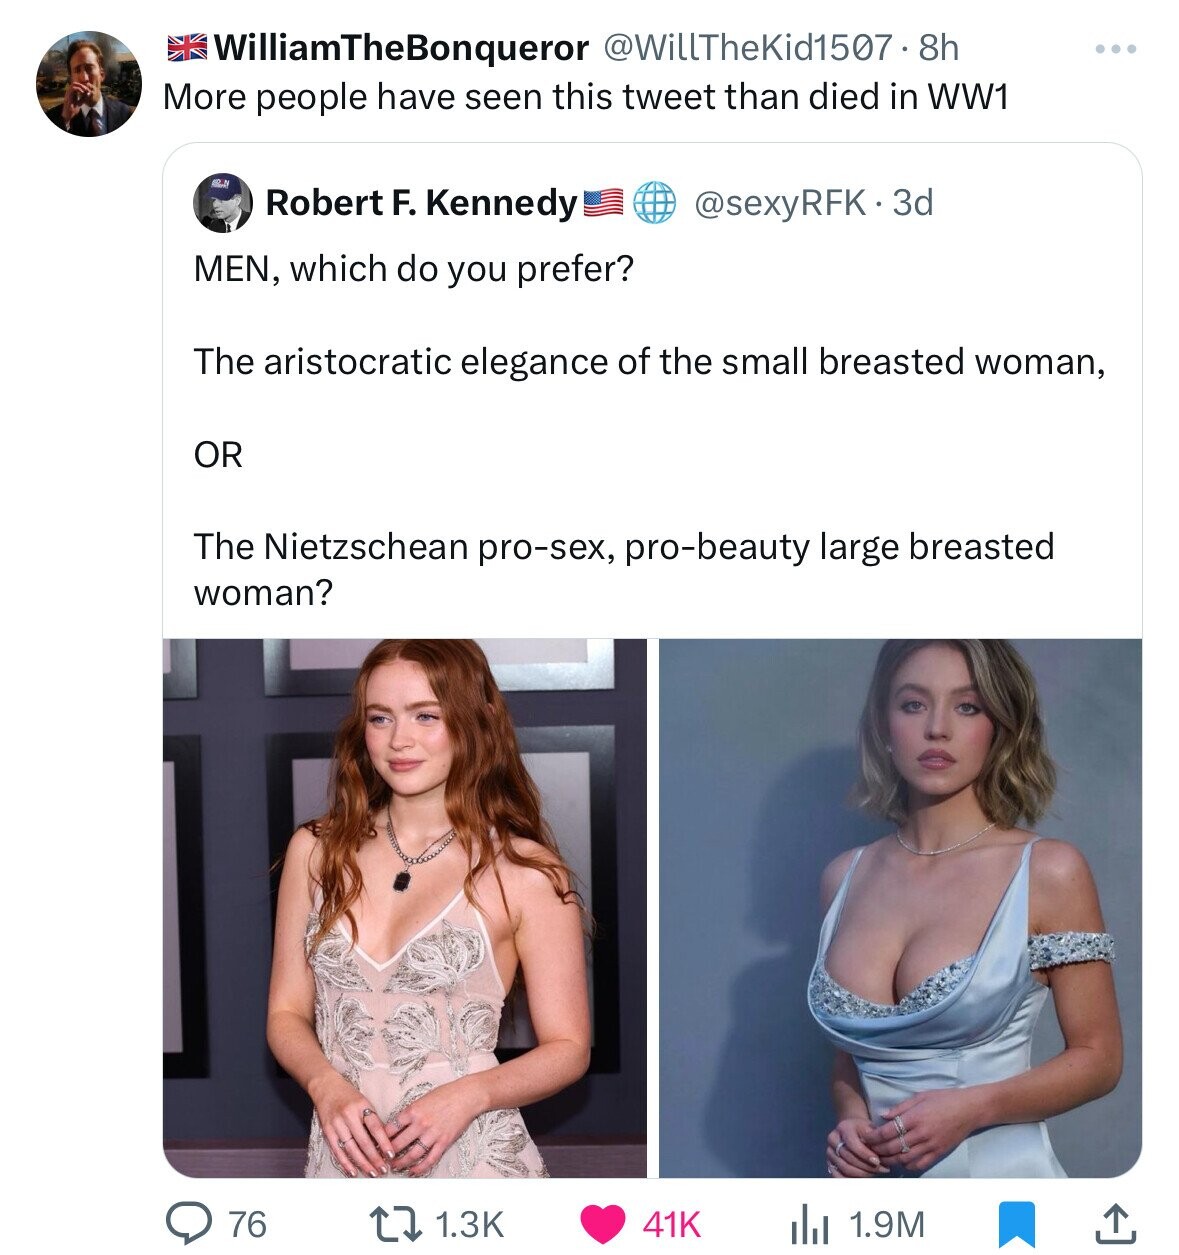 WilliamTheBonqueror @WillTheKid1507 8h More people have seen this tweet than died in WW1 Robert F. Kennedy @sexyRFK-3 3d MEN, which do you prefer? The aristocratic elegance of the small breasted woman, OR The Nietzschean pro-sex, pro-beauty large breasted woman? 76 1.3K 41K 1.9M 